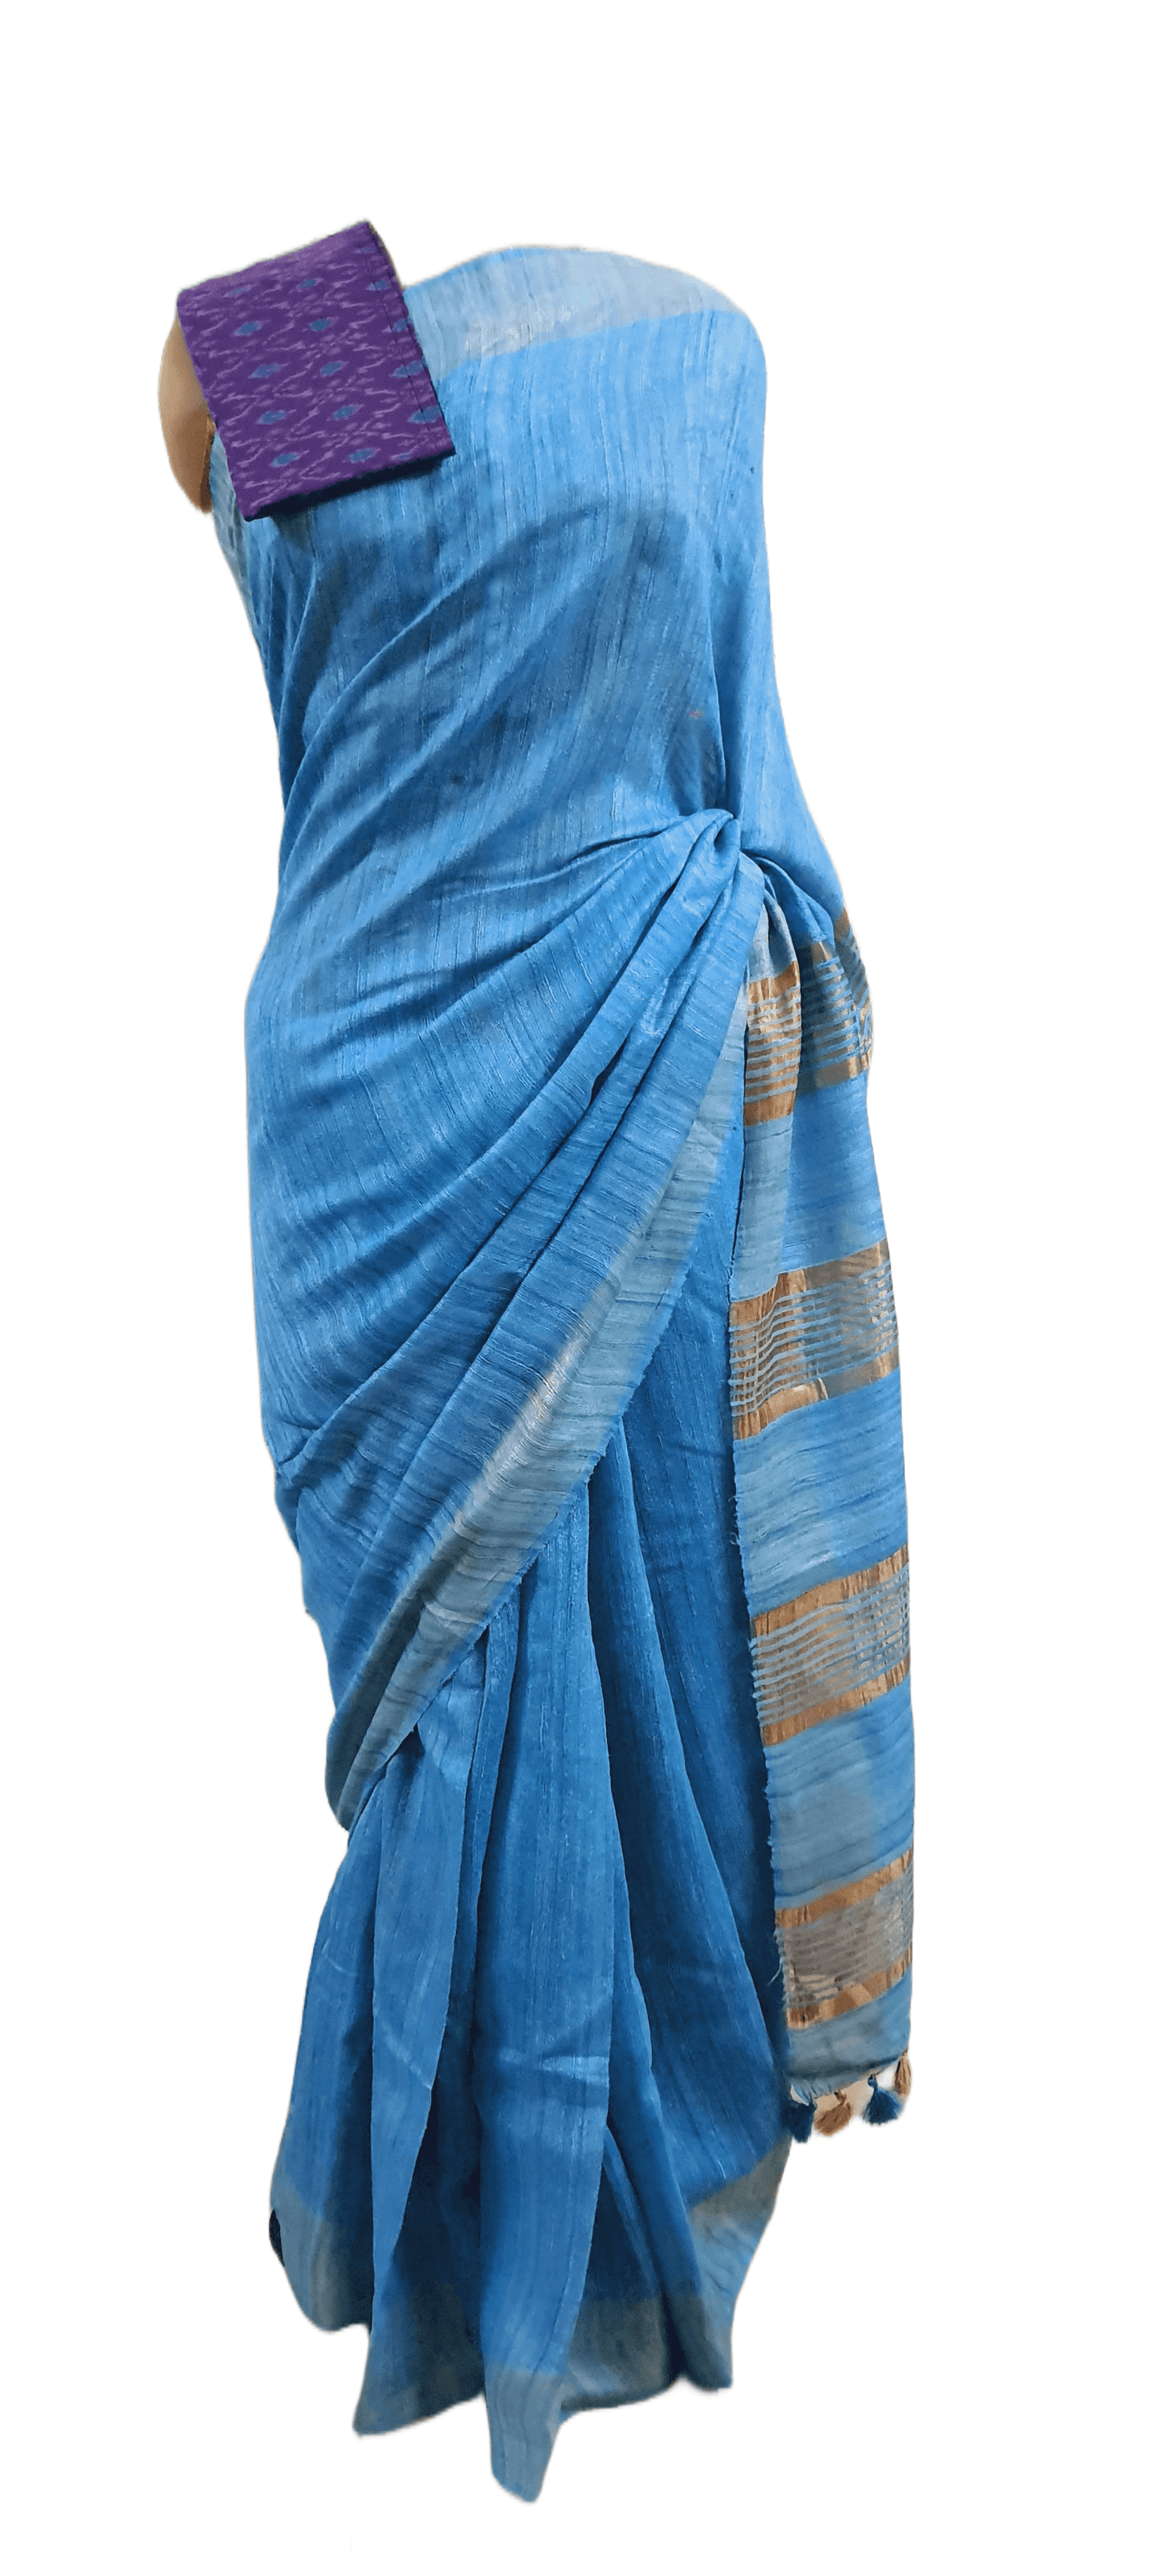 Blue pure Katan Ghicha Saree with Pure Ikkat Silk Blouse KG11 - Ethnic's By Anvi Creations